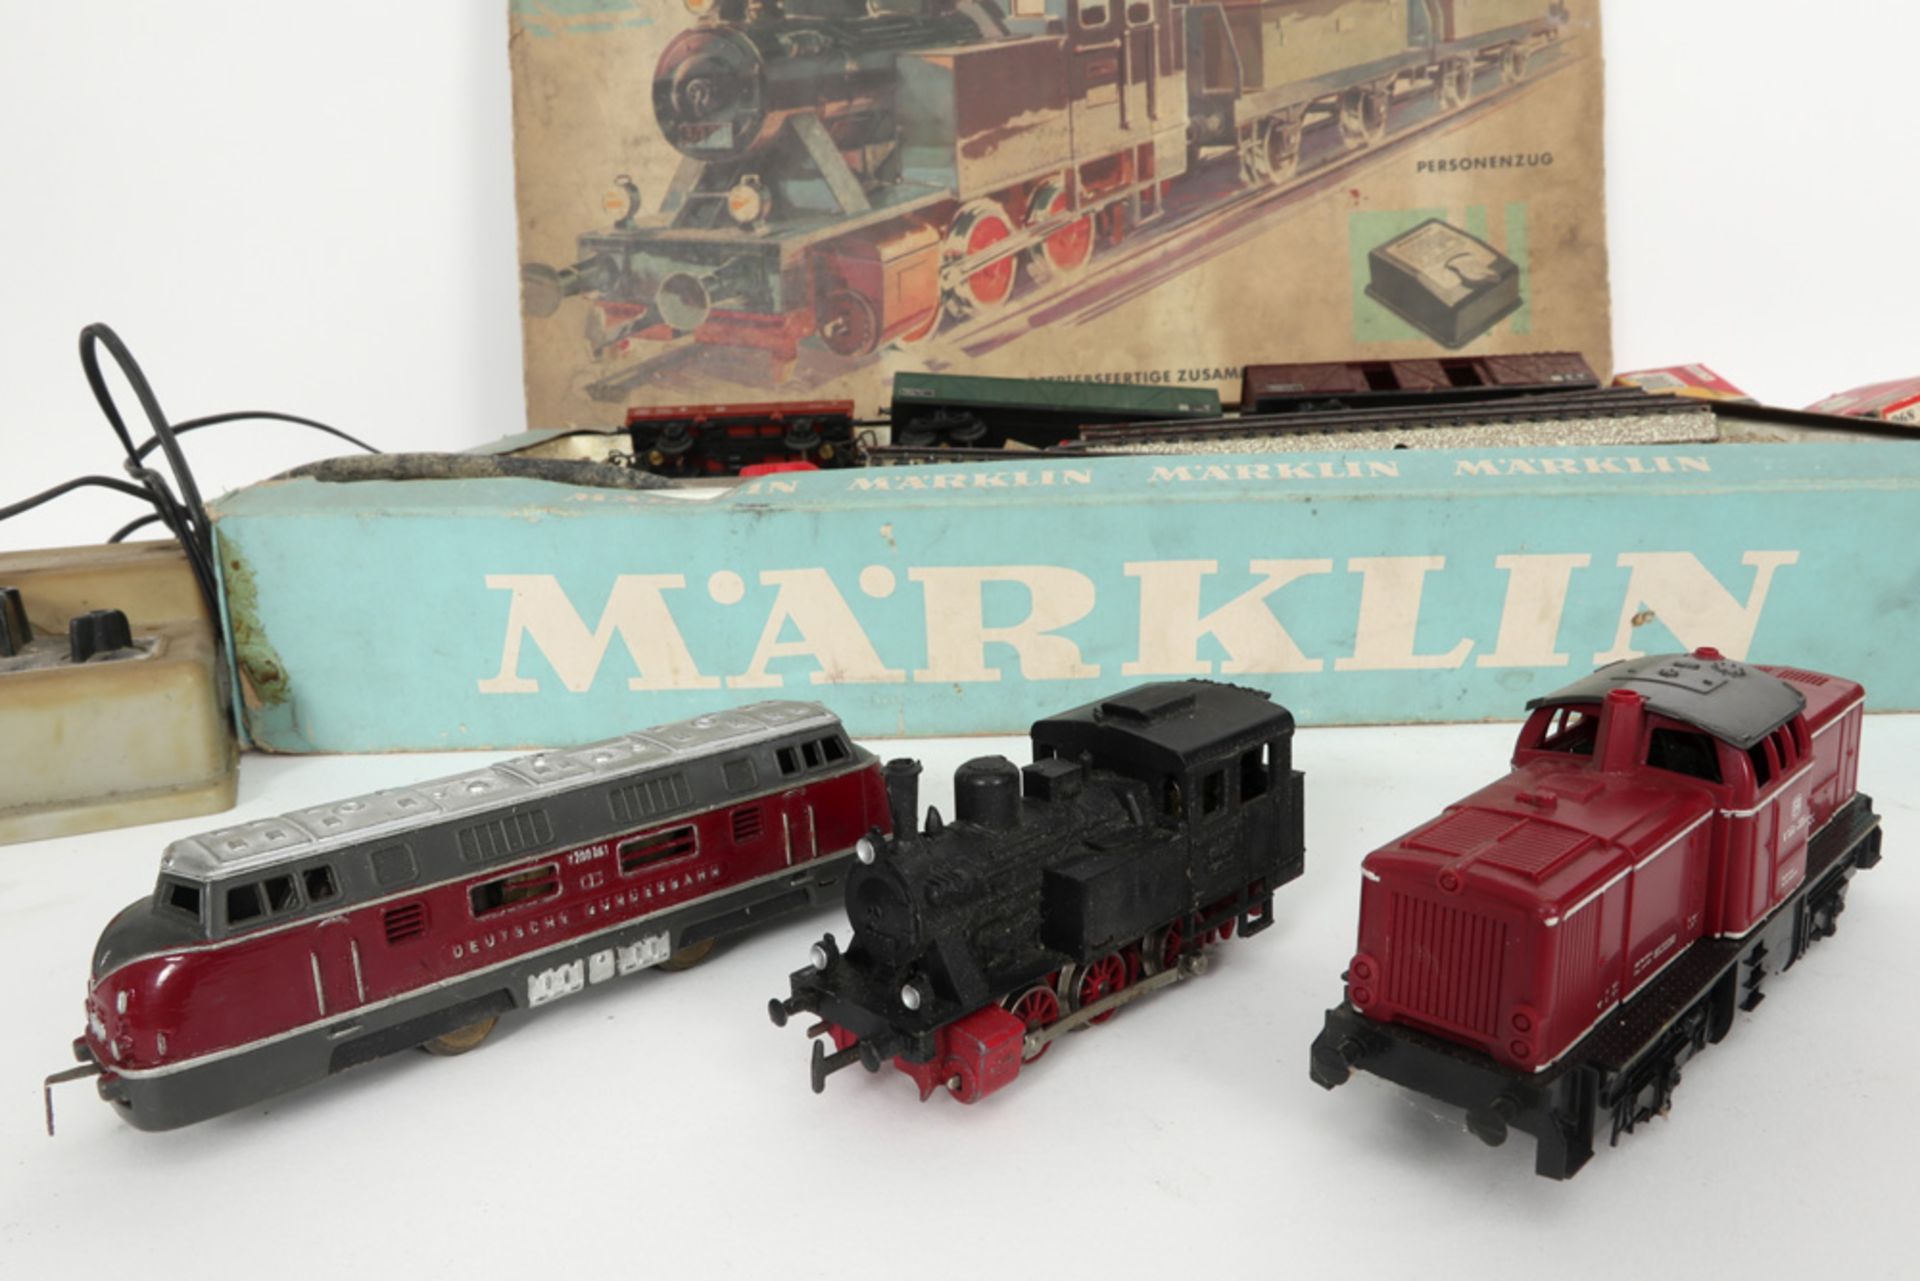 various lot for a model train with wagons, rails, ... || Lot met modeltreinen, - wagons, sporen, ... - Image 3 of 4